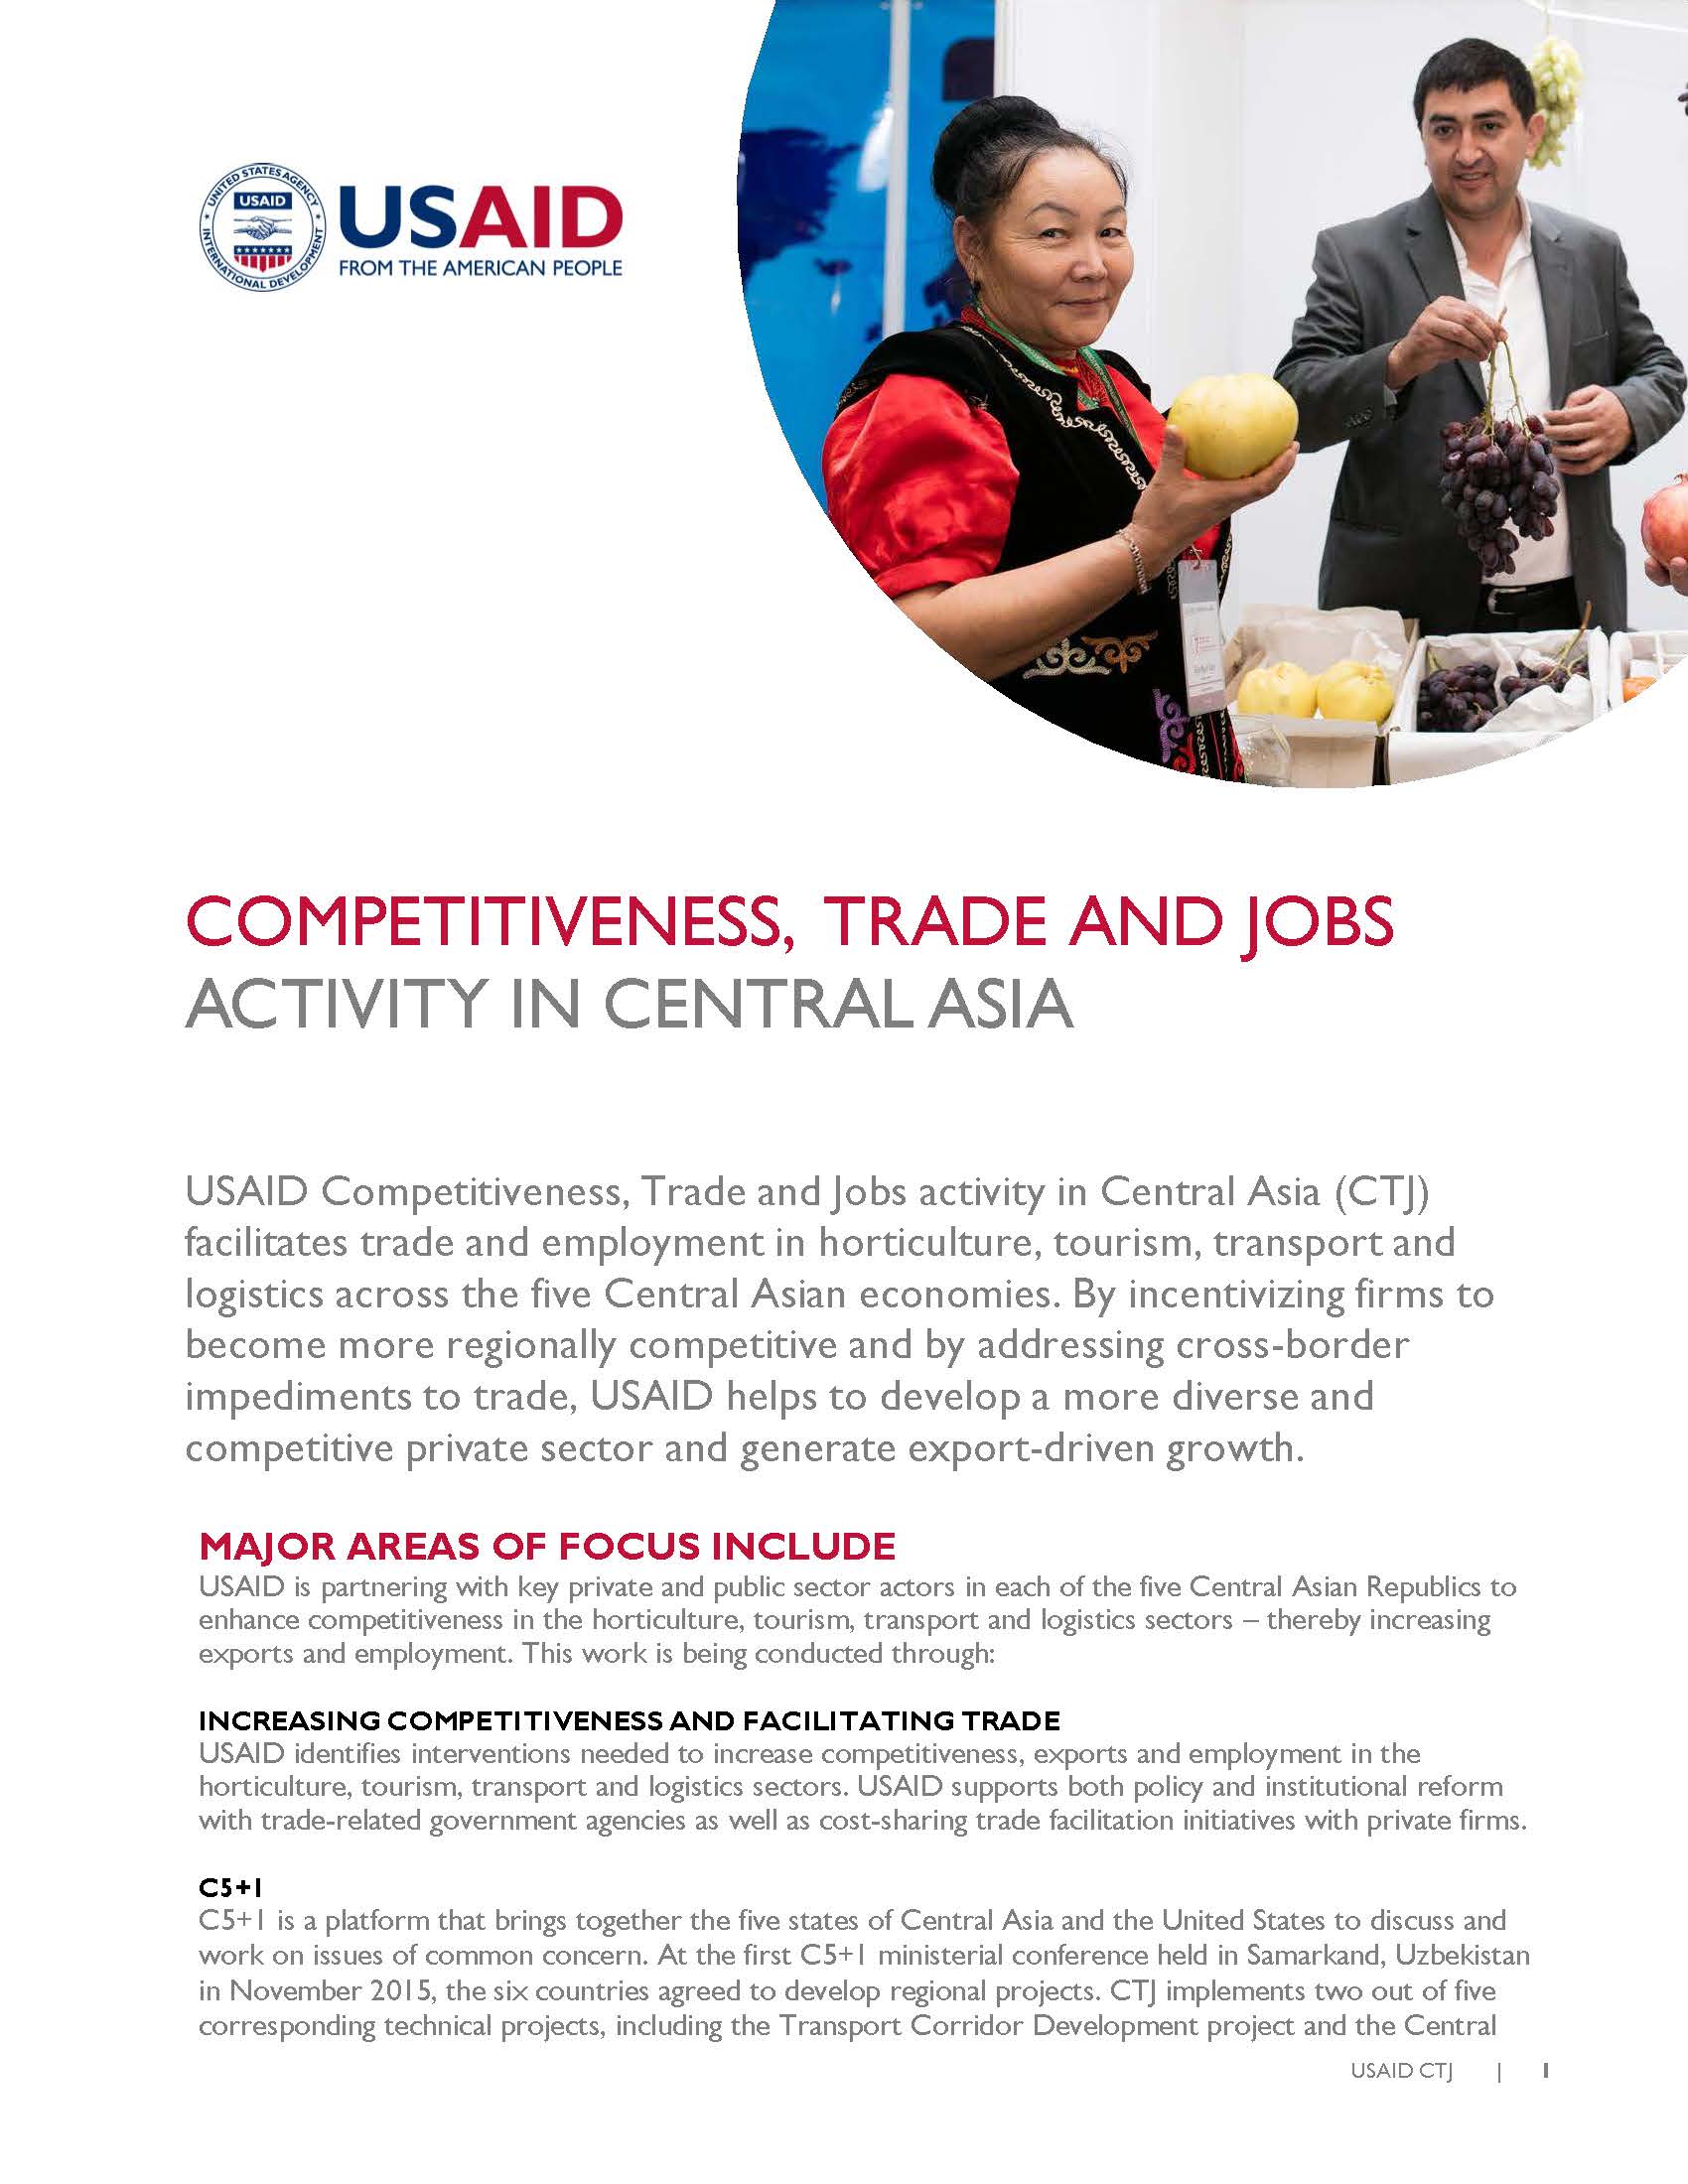 USAID Competitiveness, Trade and Jobs Activity in Central Asia 